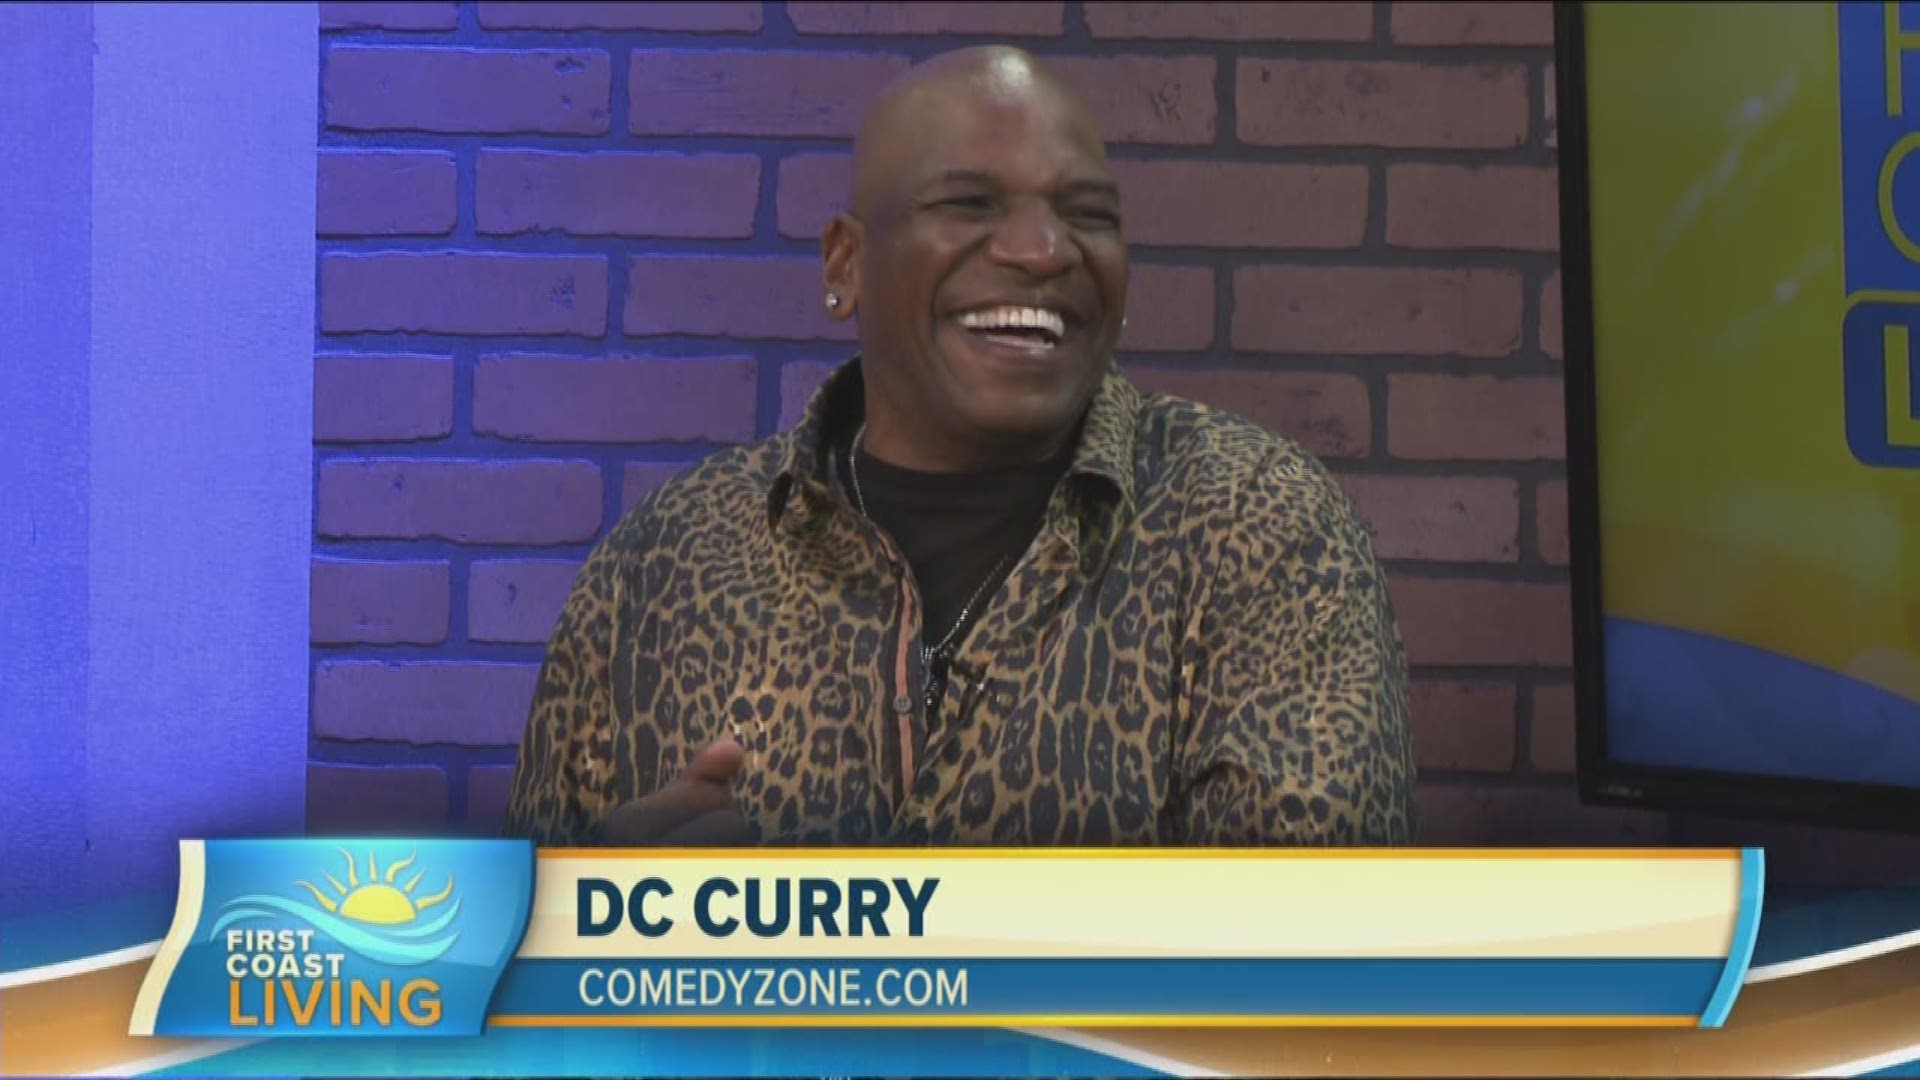 Get ready to laugh as DC Curry prepares to take the stage at the Comedy Zone in Jacksonville.